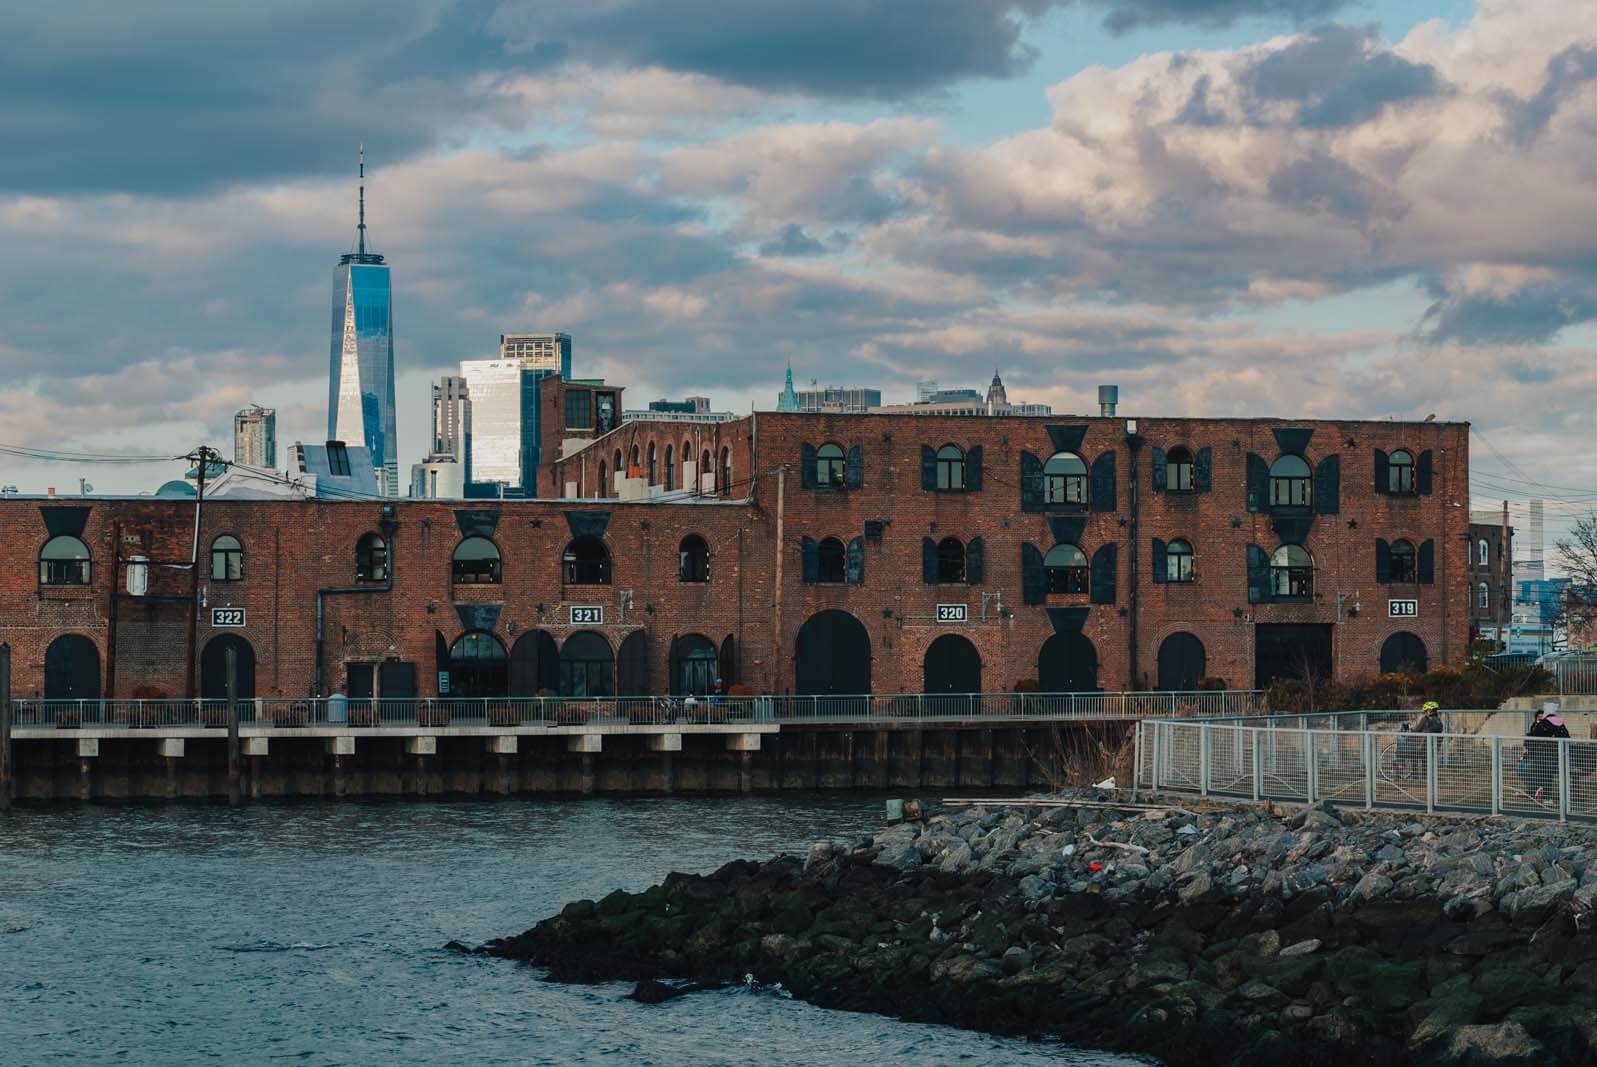 Brooklyn Sunset Location in Red hook with View of Industrial Building and 1 World Trade Center